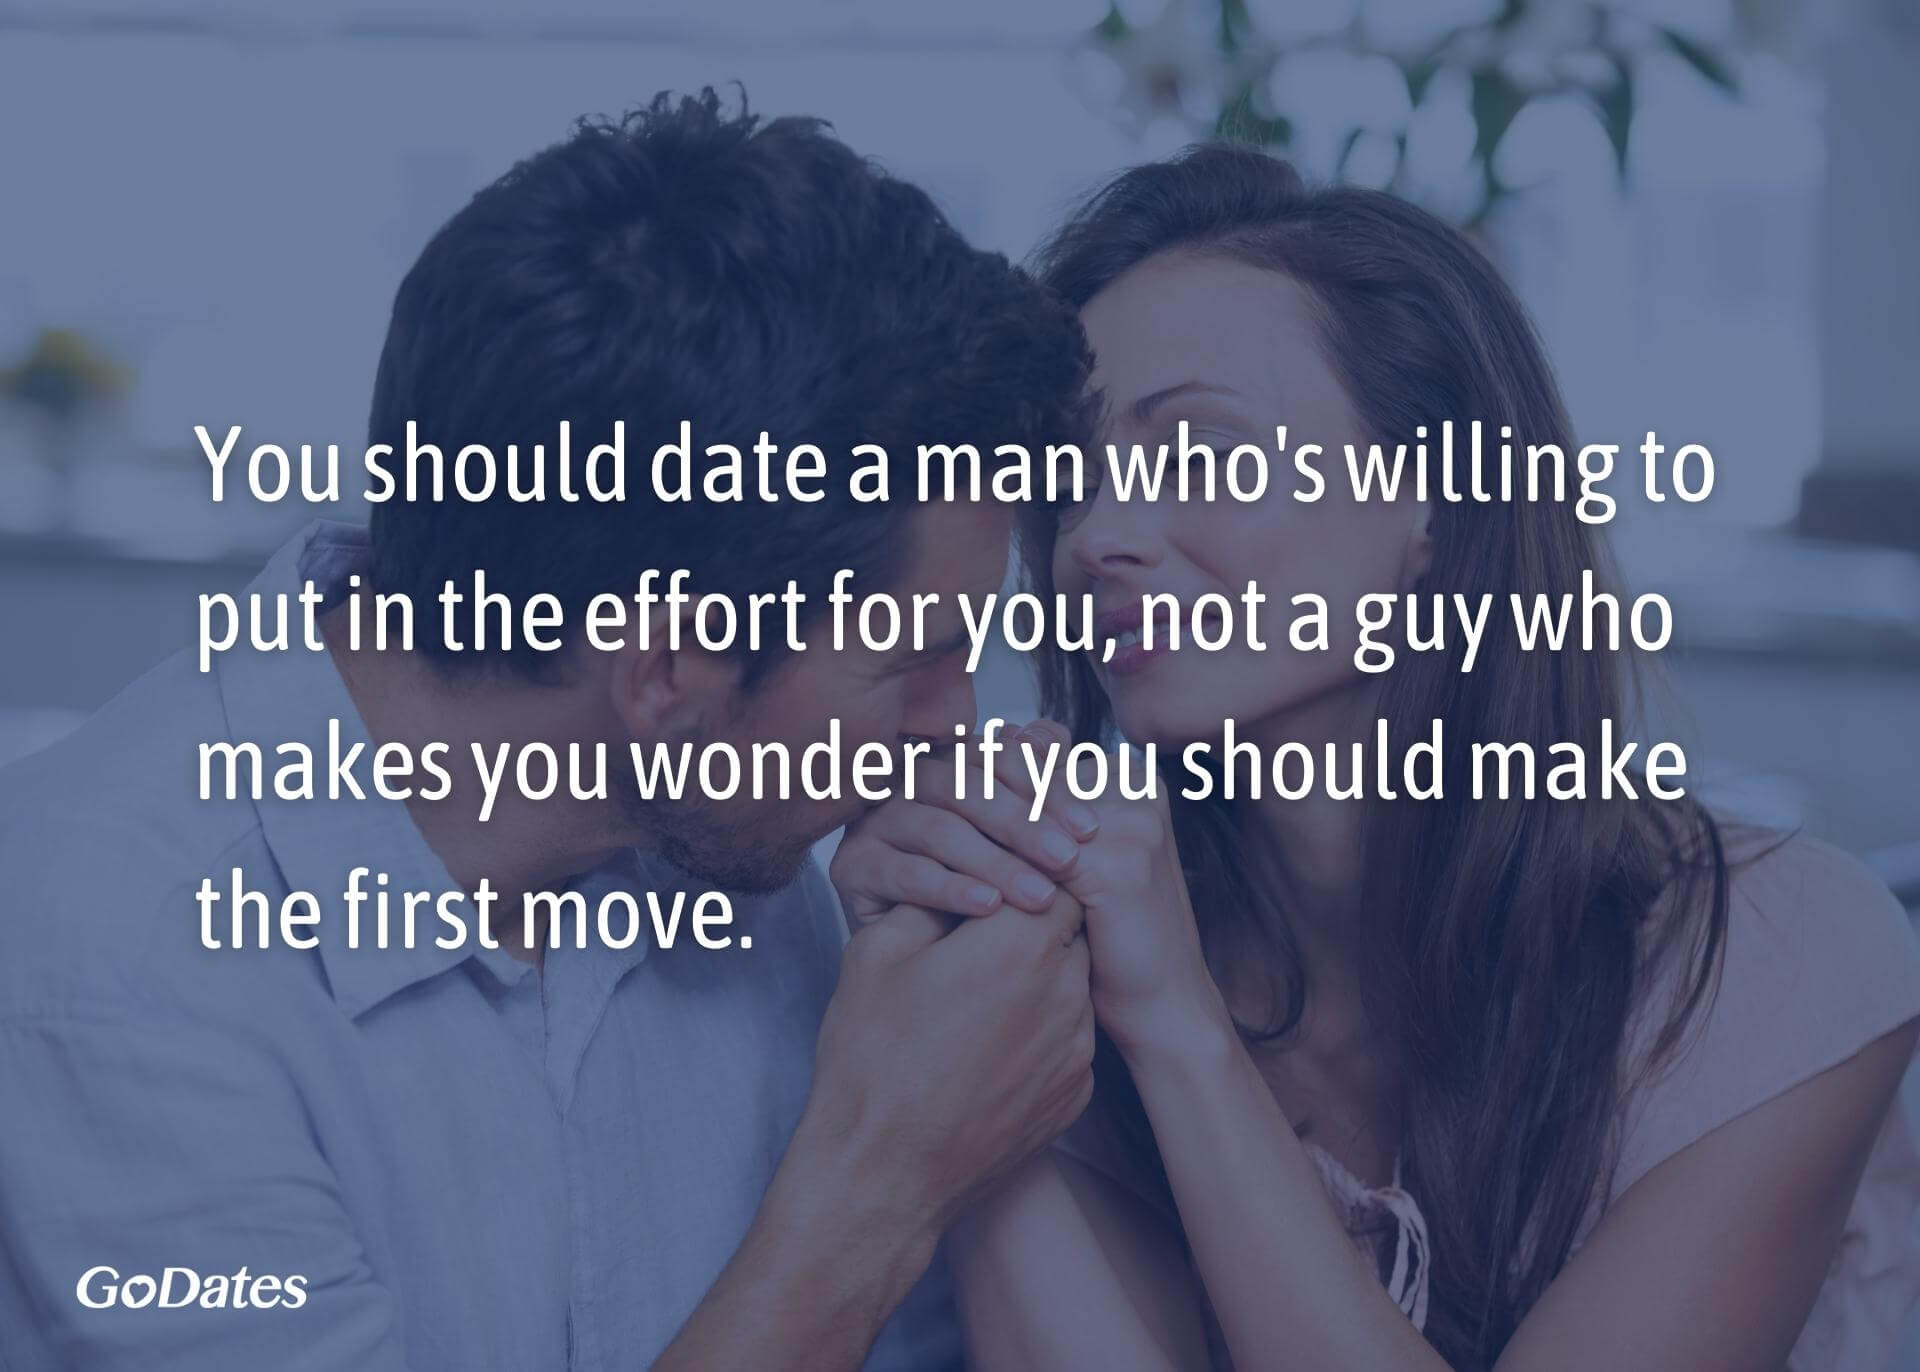 Date a man whos willing to put in effort quote